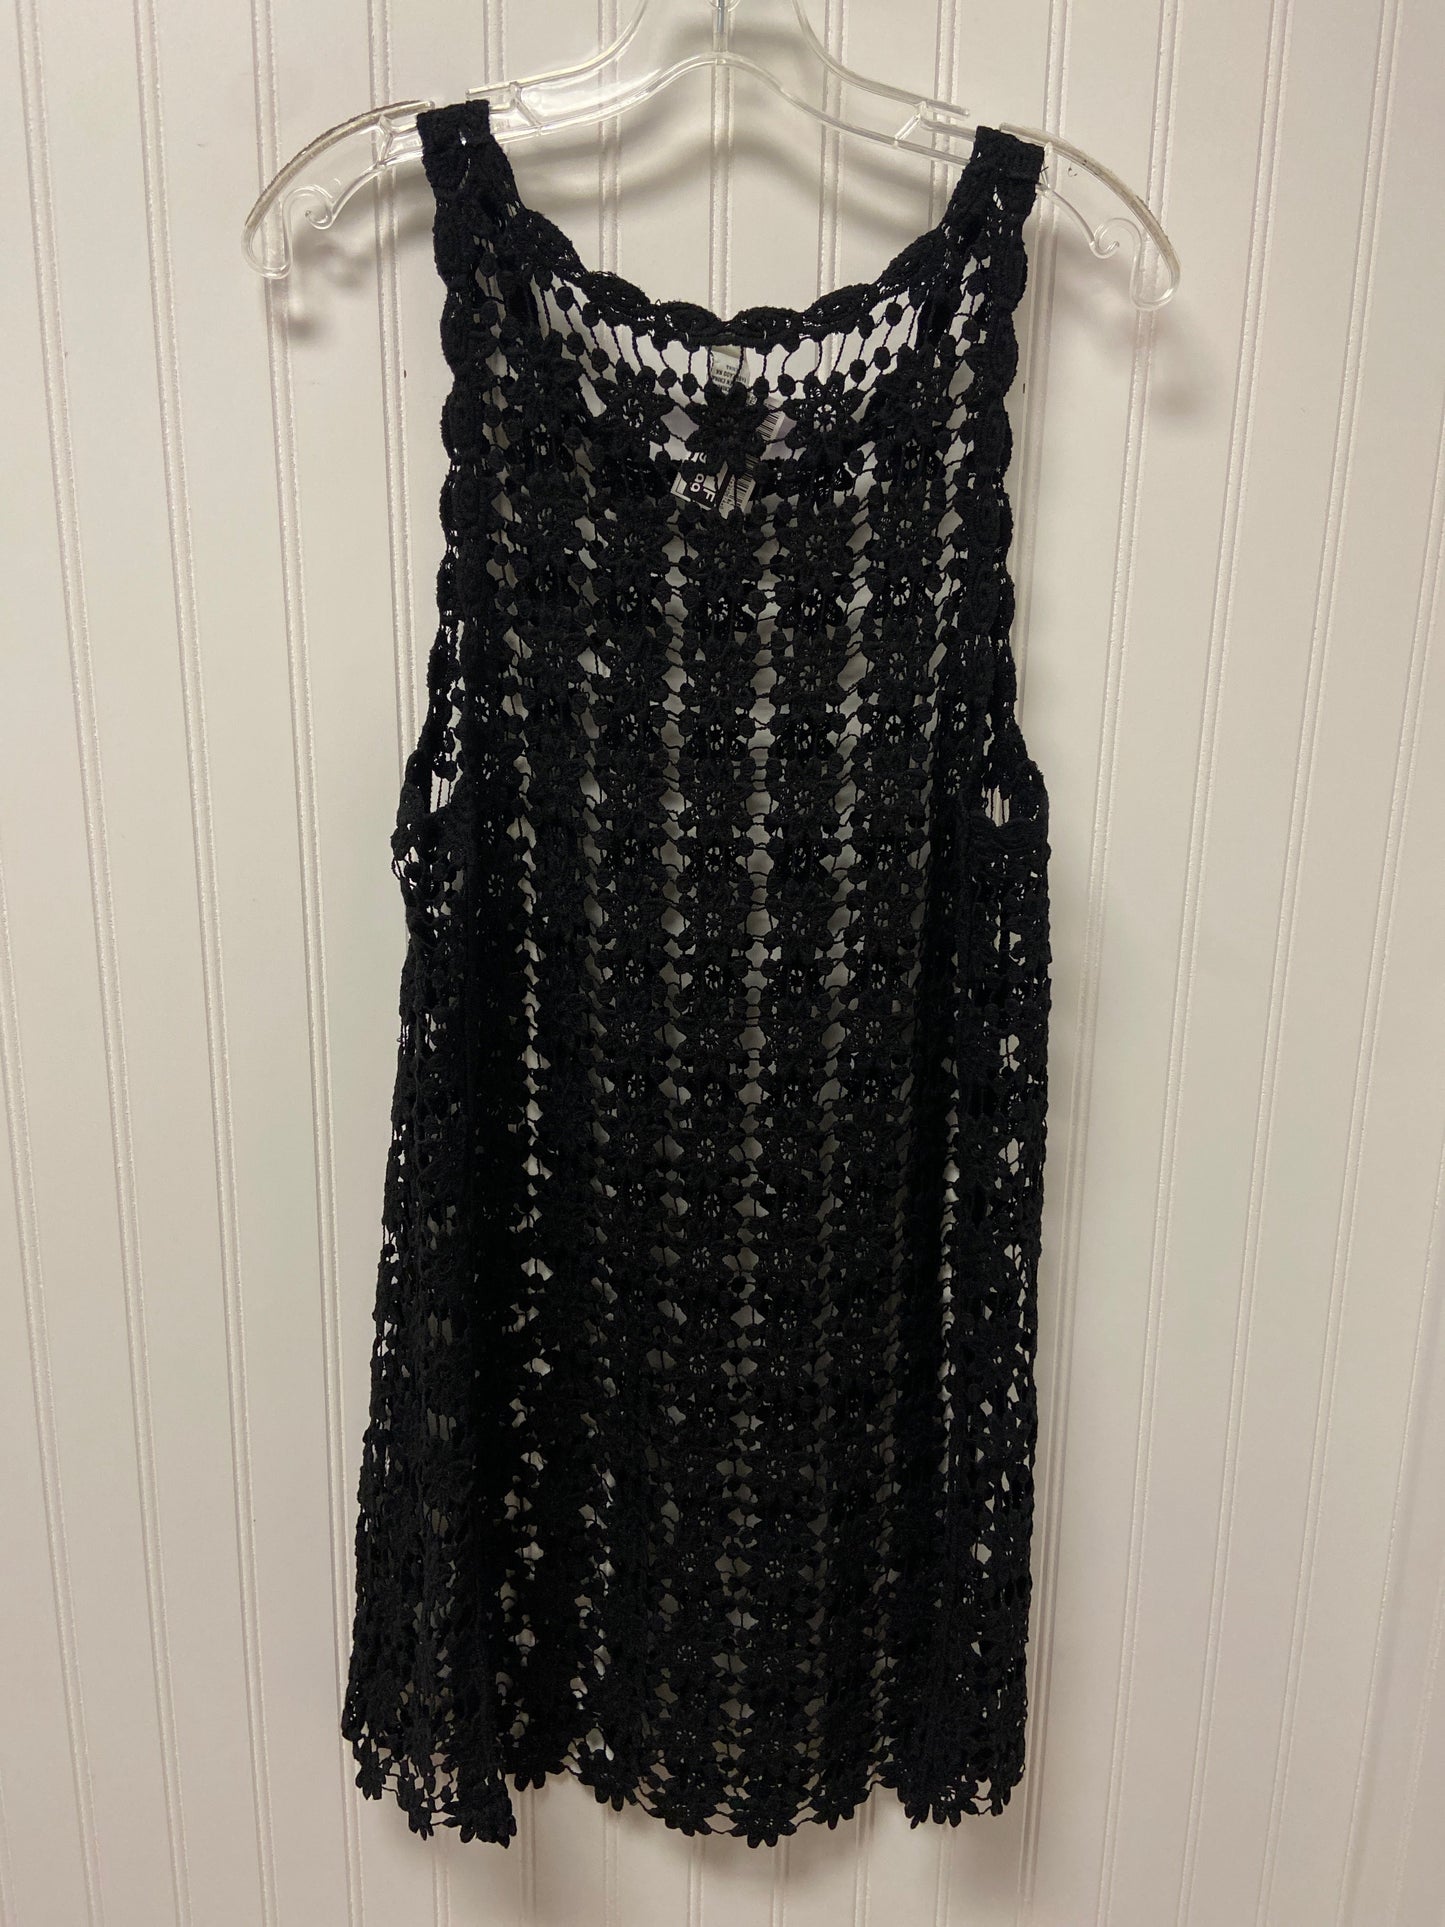 Black Swimwear Cover-up Forever 21, Size L